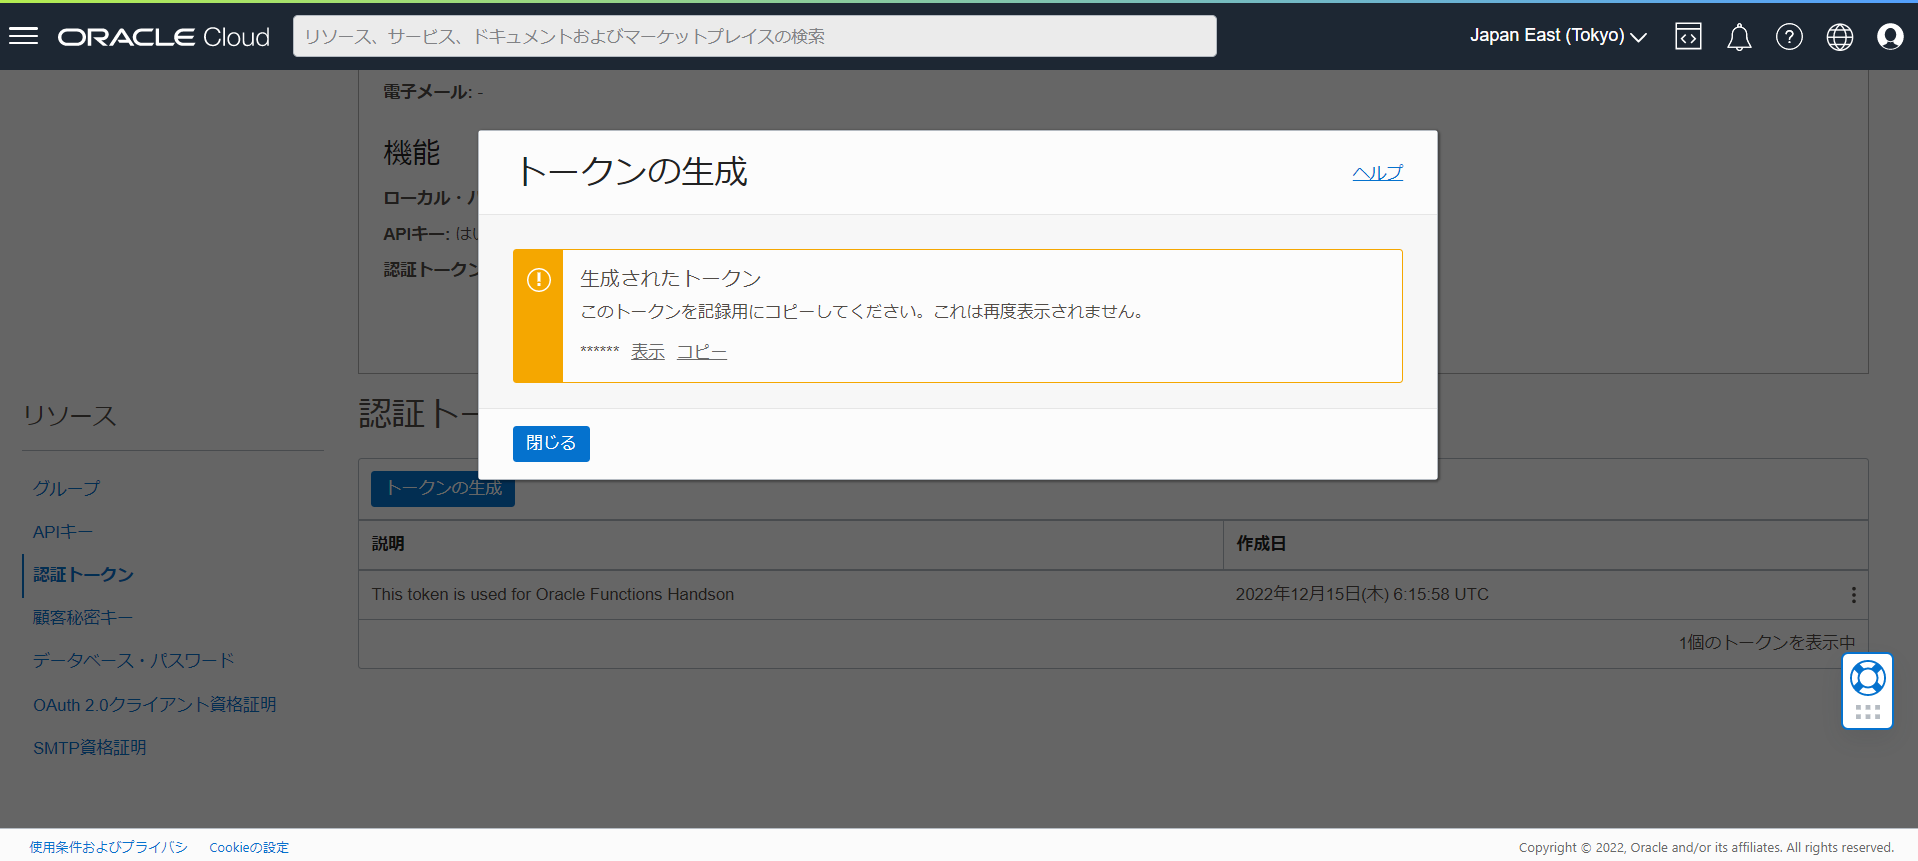 Oracle Cloud Infrastructure Functionsではじめるサーバレス入門 9